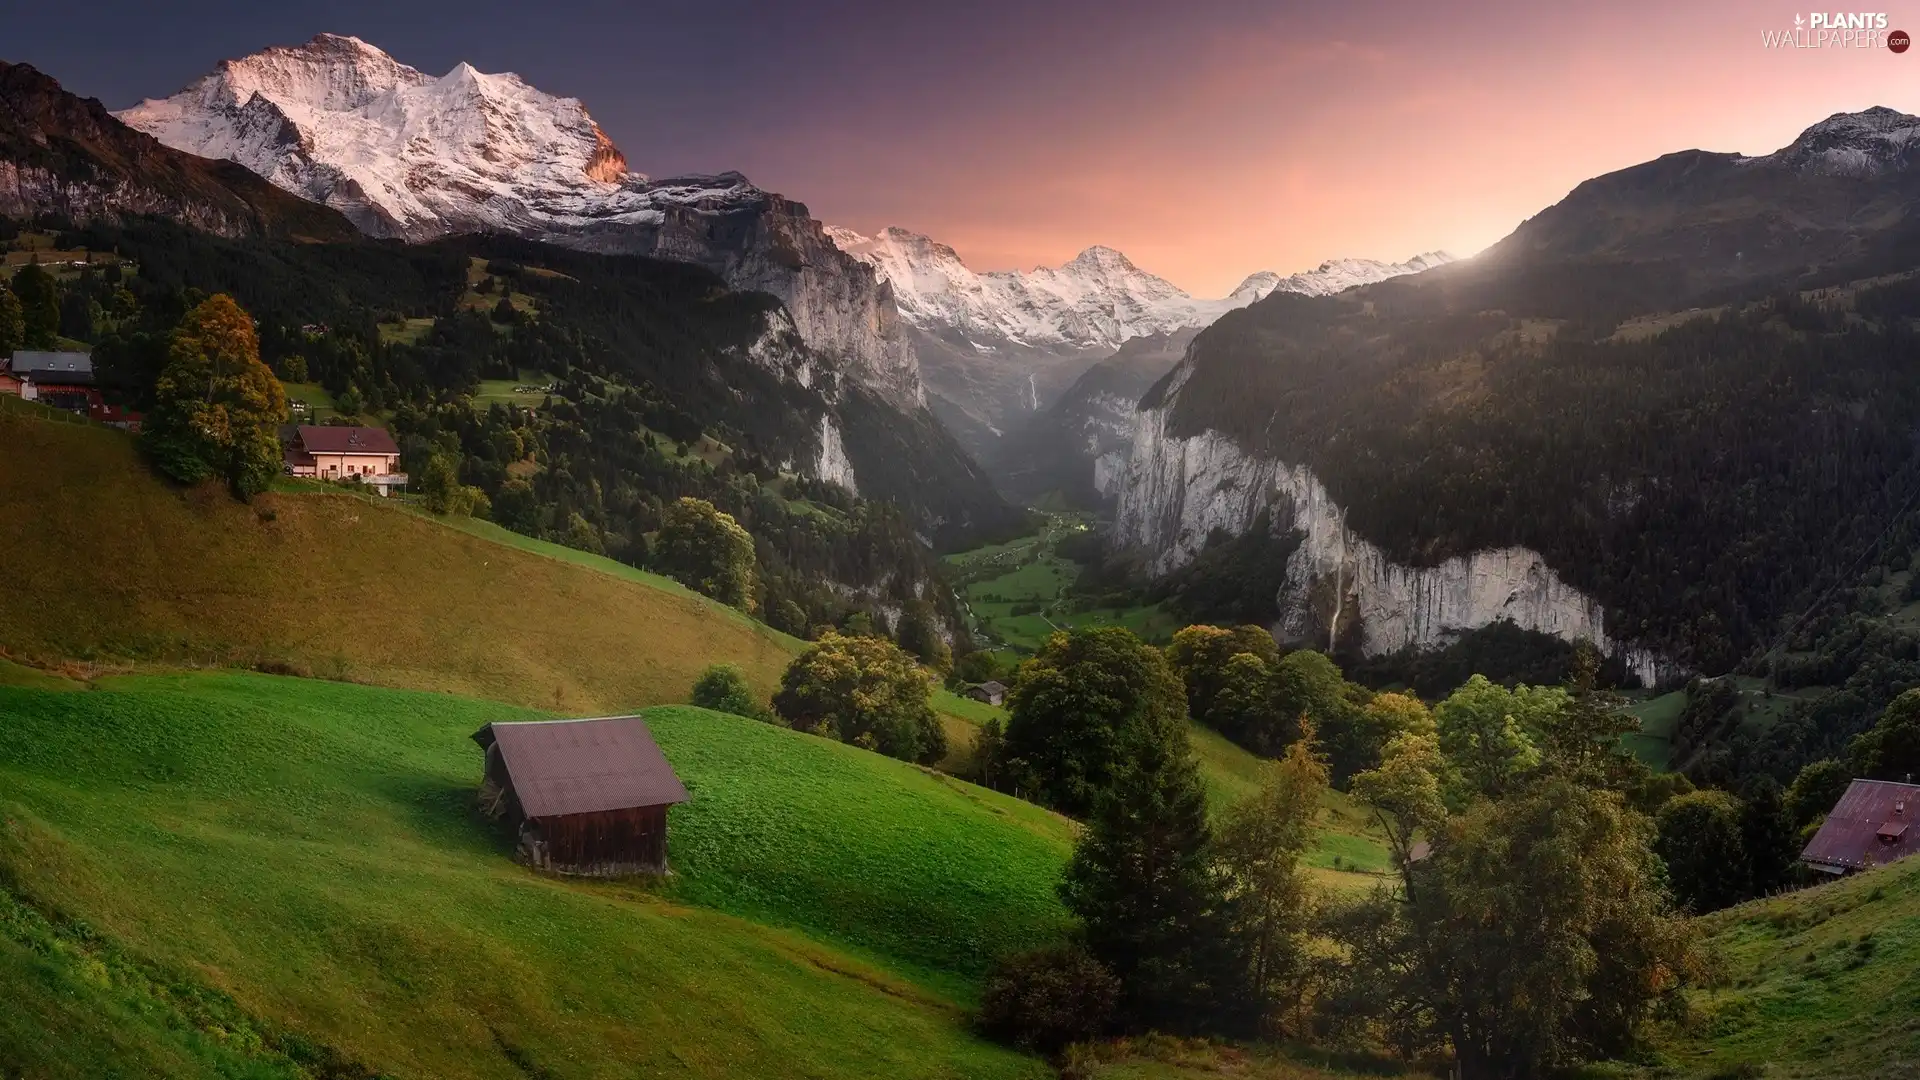 trees, Mountains, woods, viewes, Sunrise, Switzerland, Canton of Bern, Lauterbrunnental Valley, Bernese Alps, Wengen, Houses